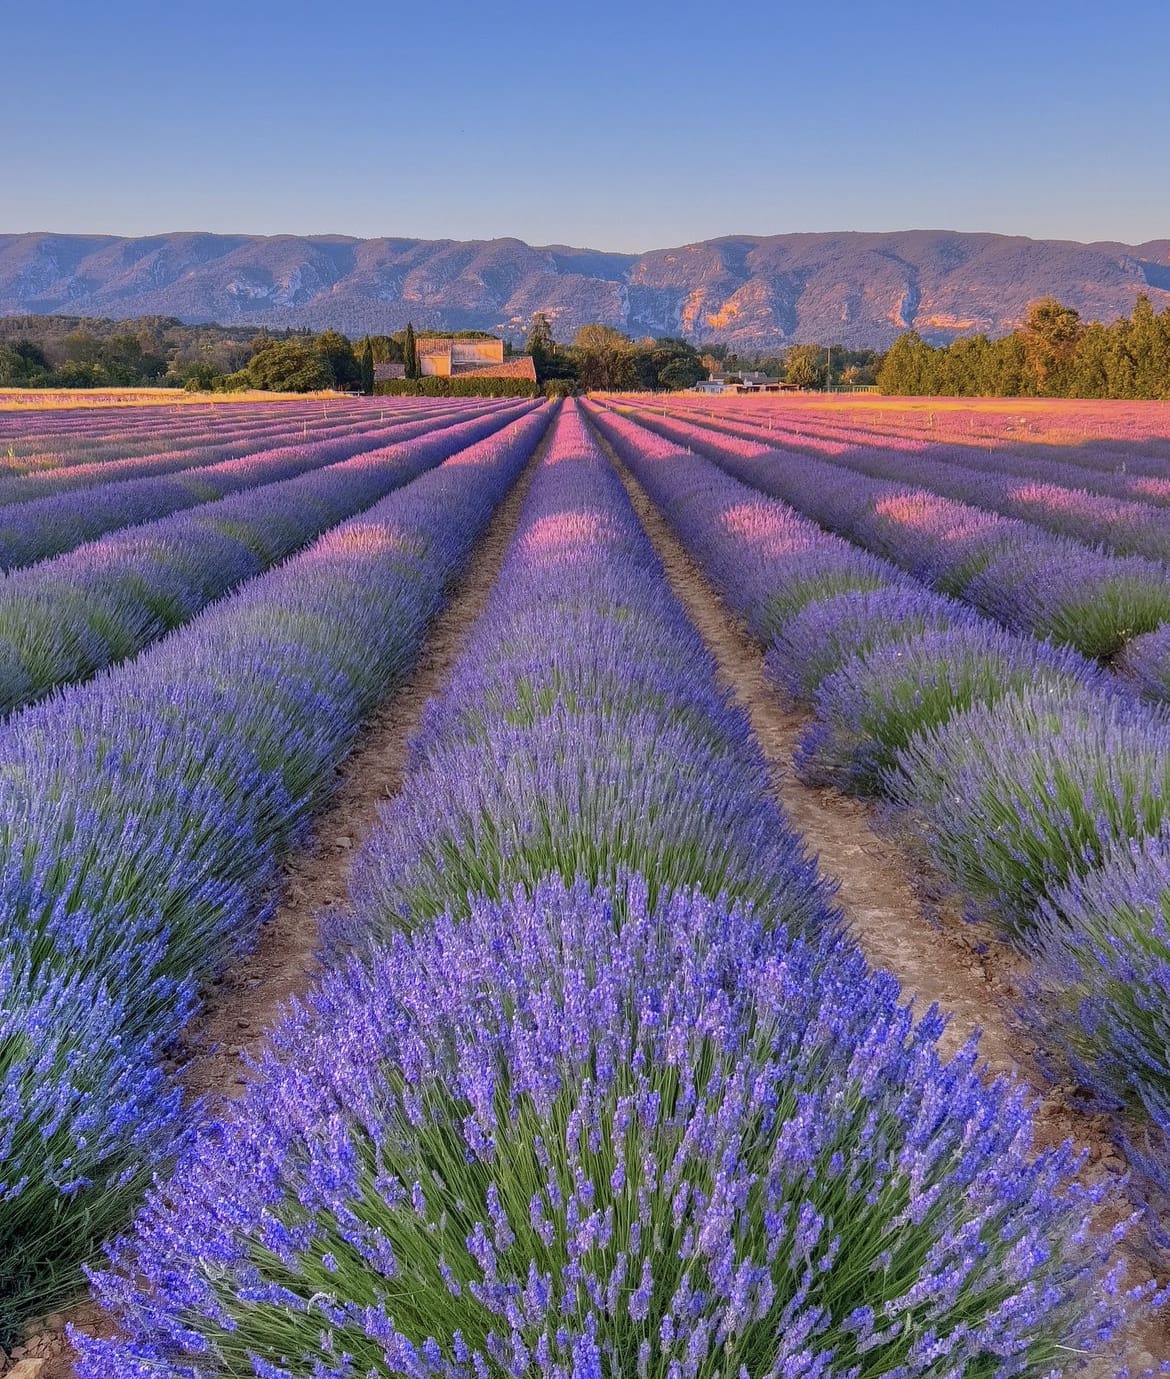 Luberon Valley - The 10 Best Places to See Lavender Fields in Provence